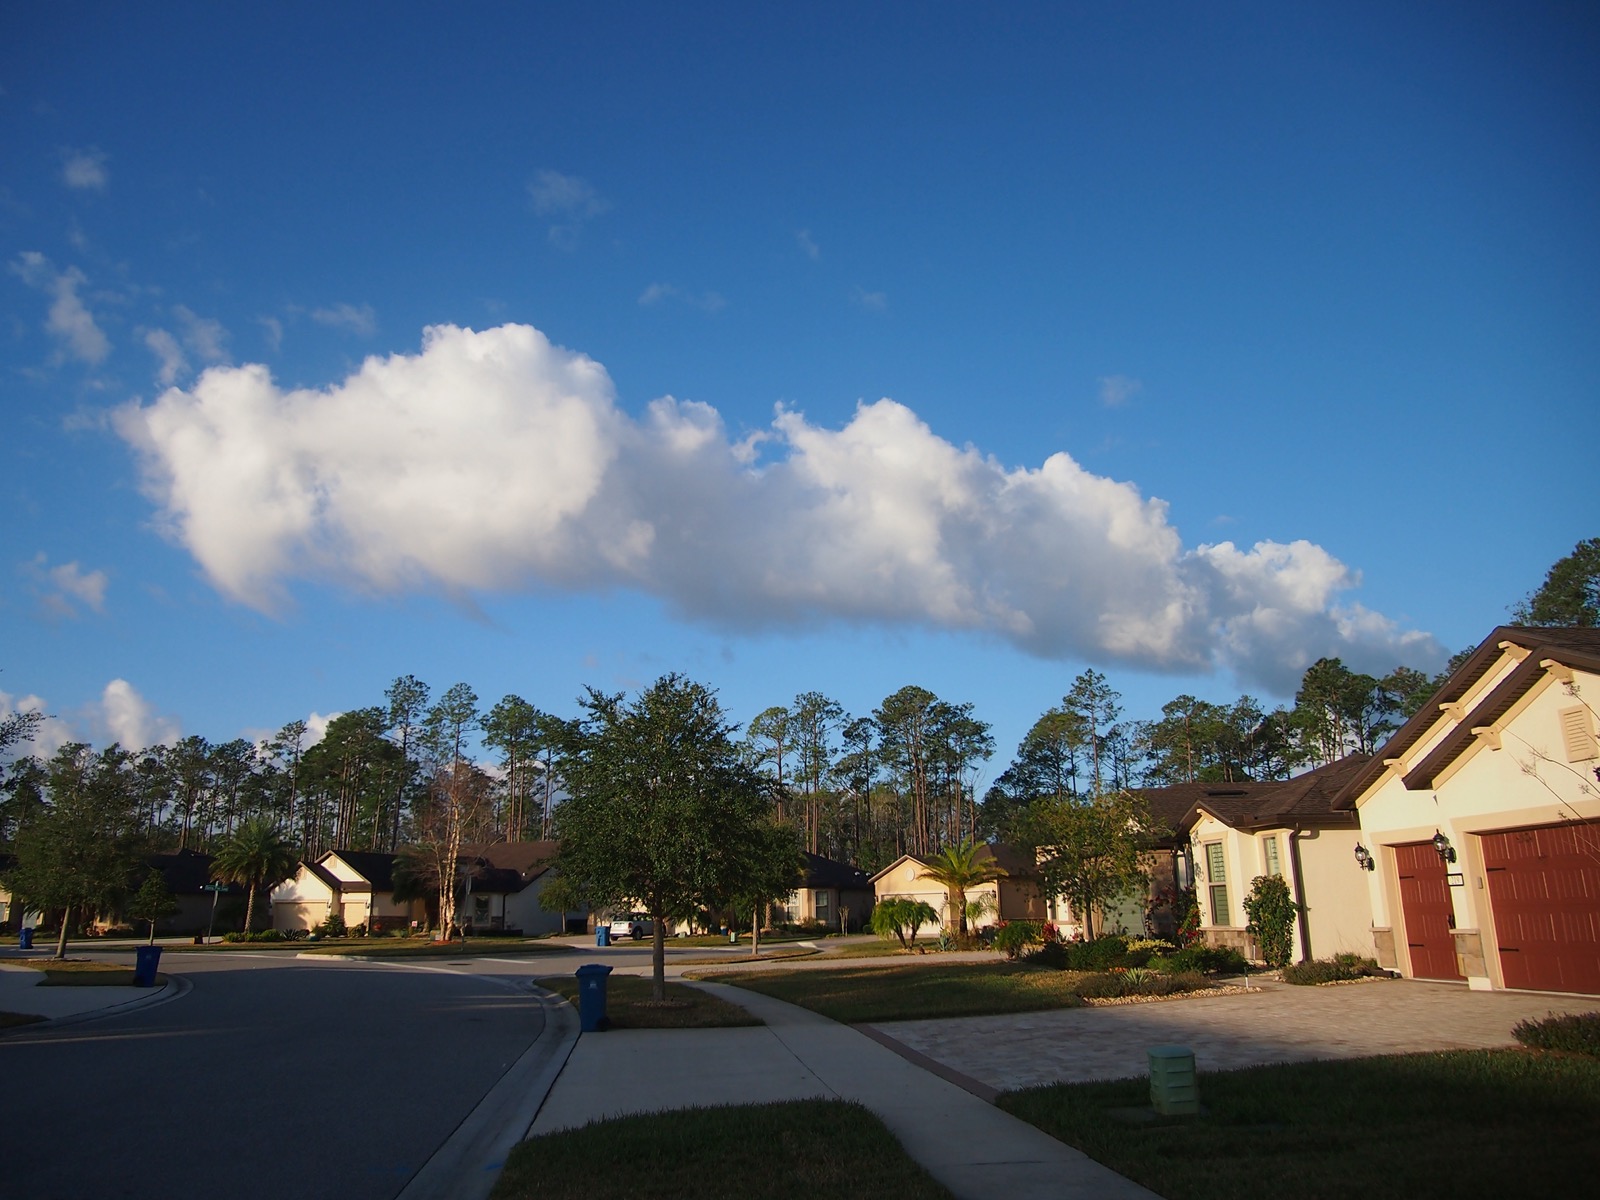 Cloud train over a suburban landscaped illuminated by low morning sun.